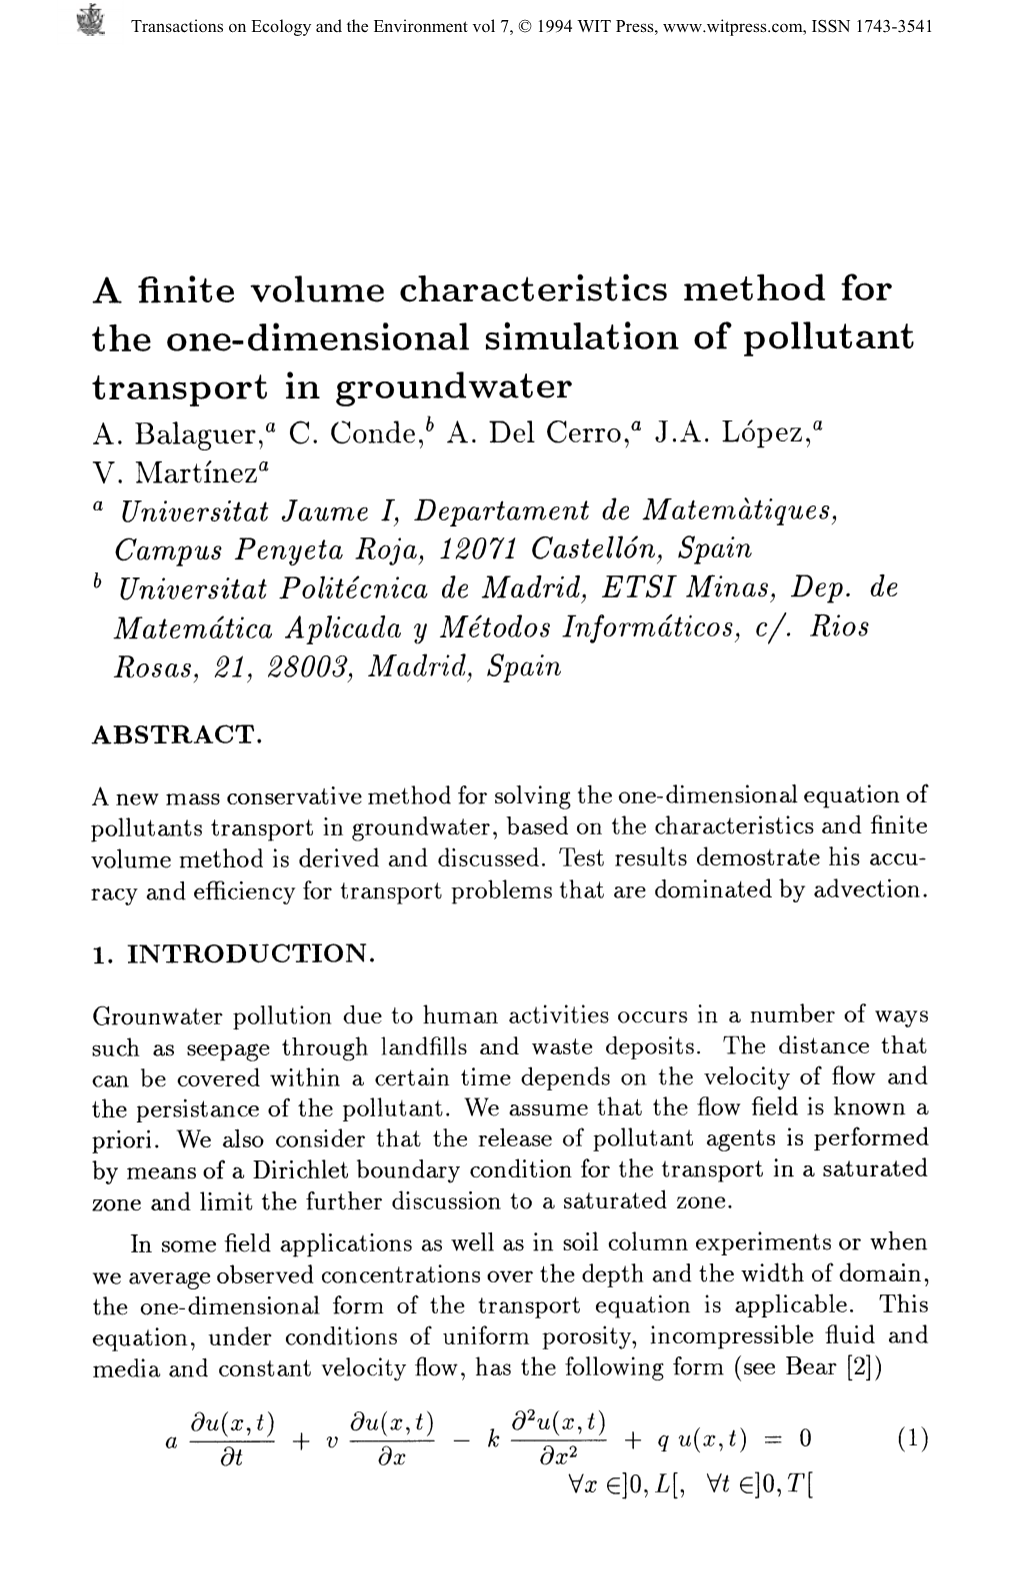 A Finite Volume Characteristics Method for the One-Dimensional Simulation of Pollutant Transport in Groundwater A. Balaguer